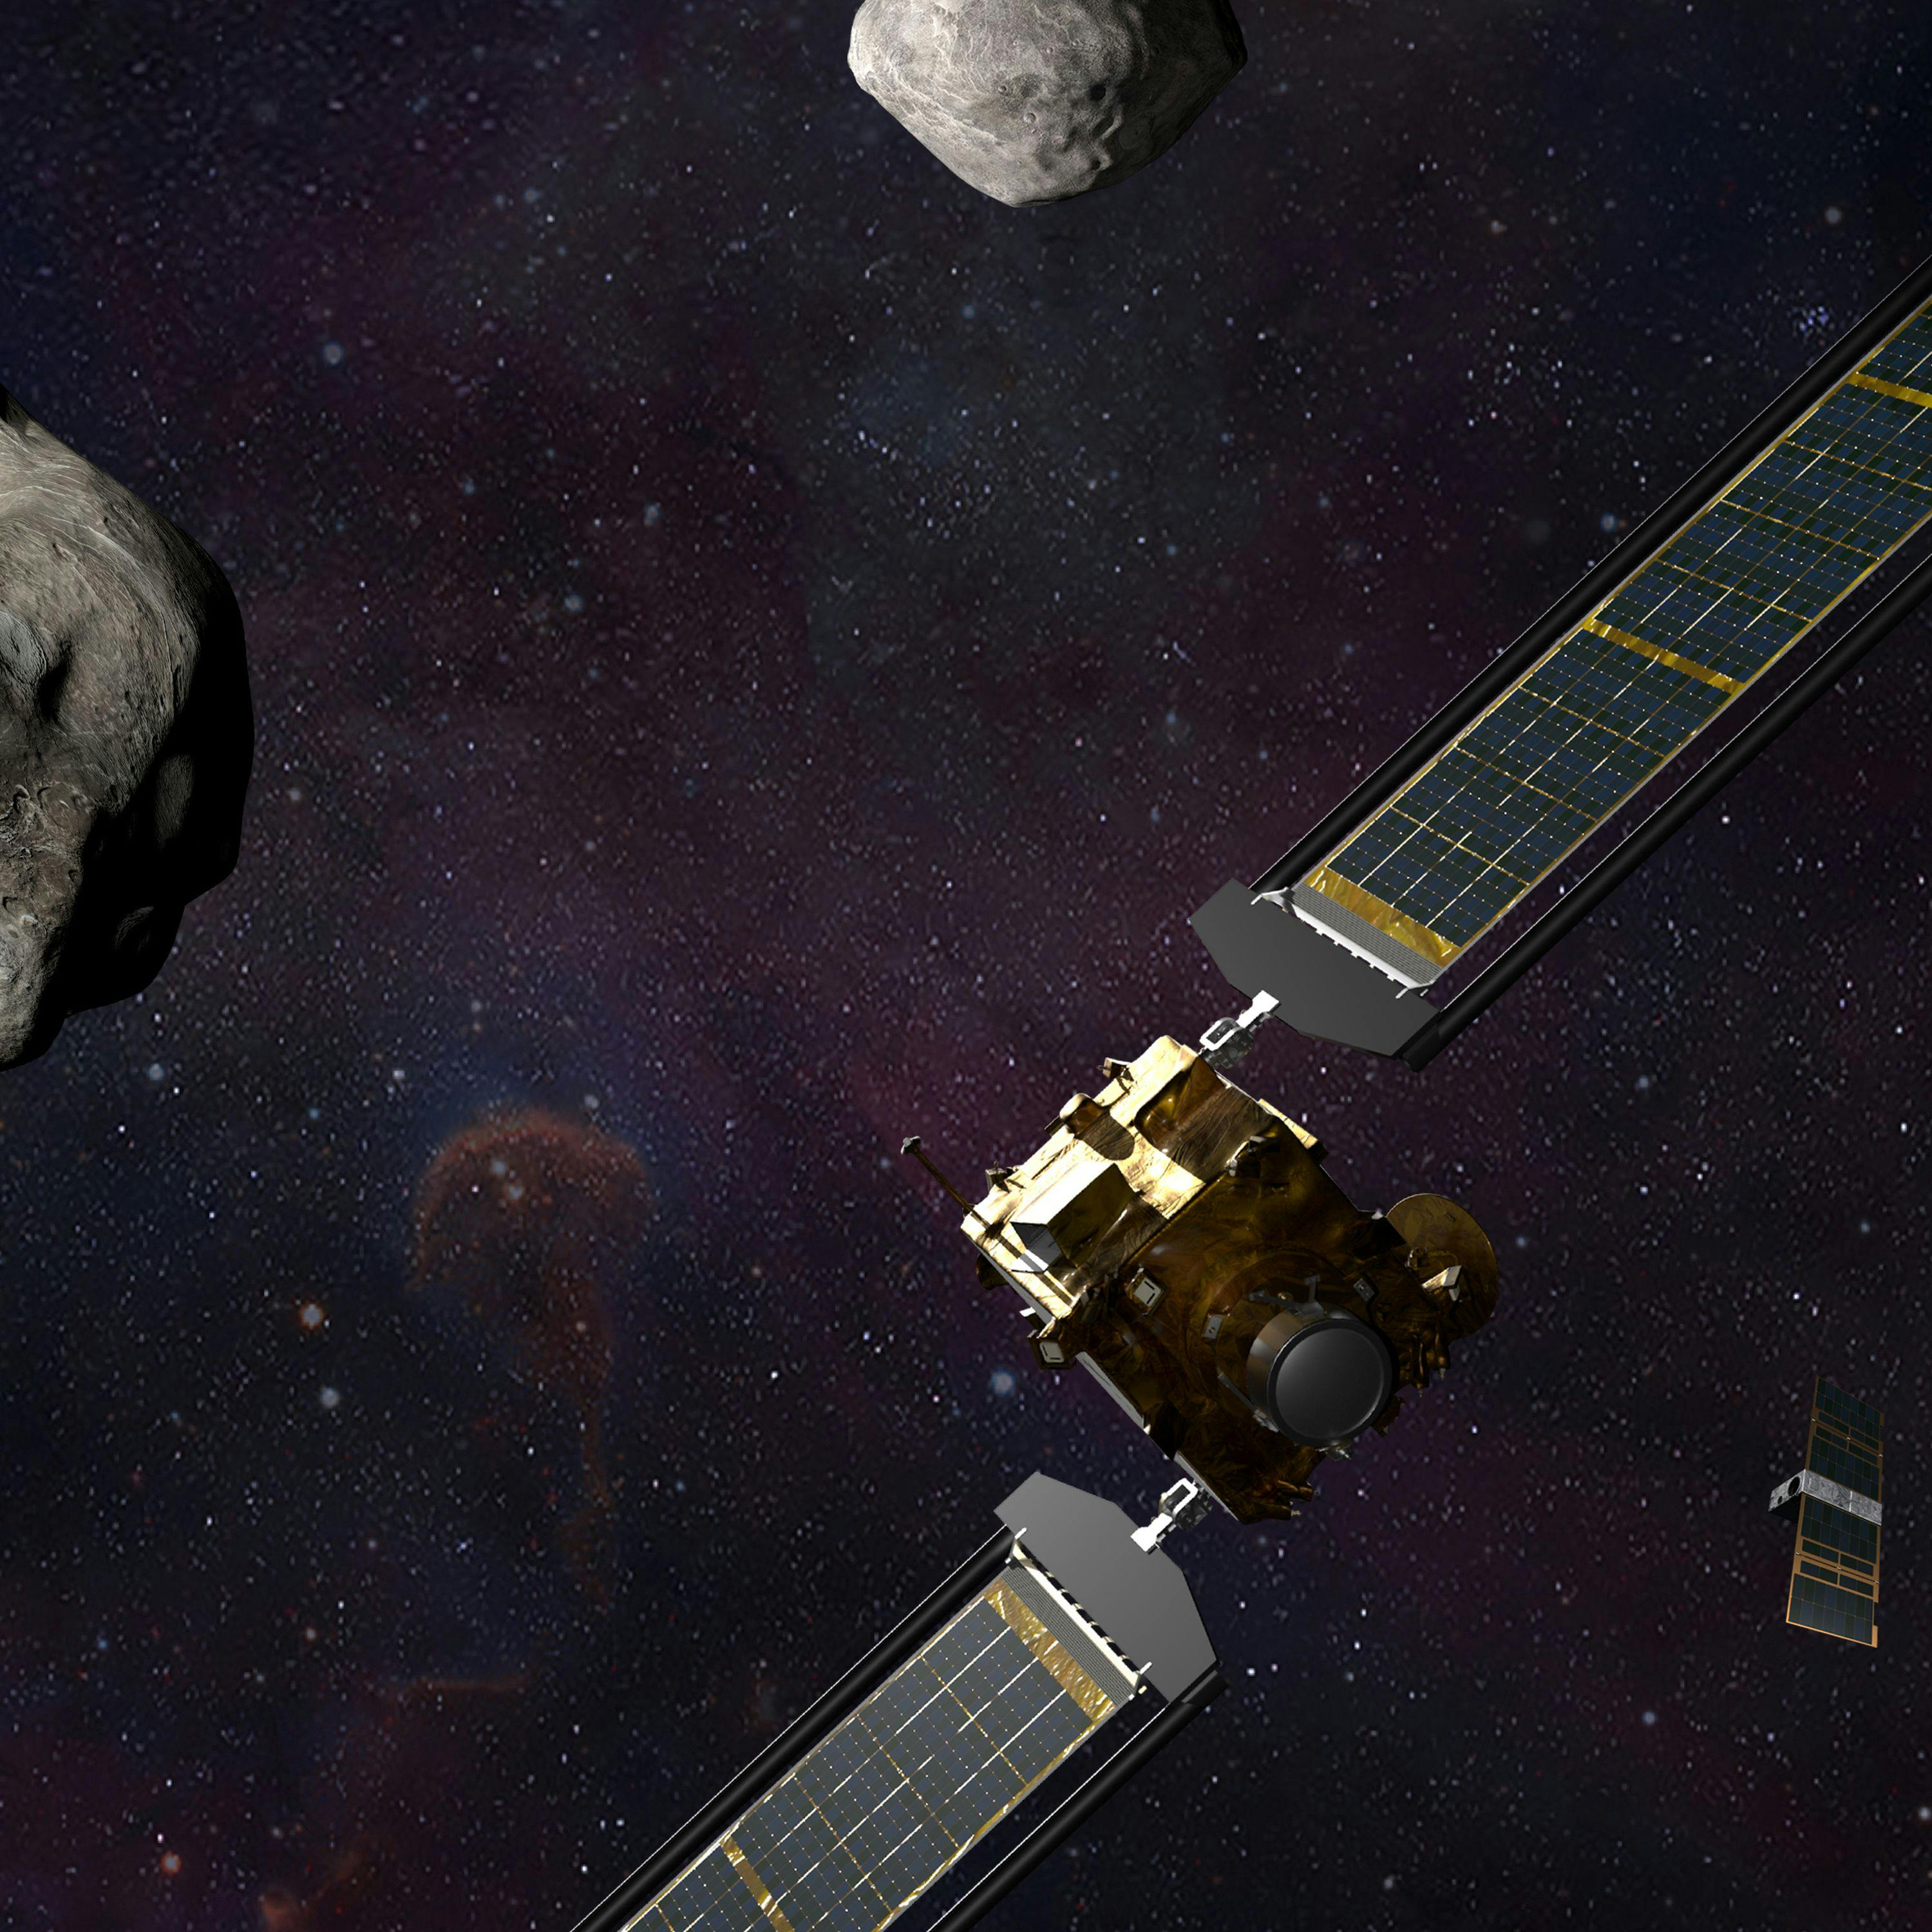 Deflecting asteroids with NASA's DART mission